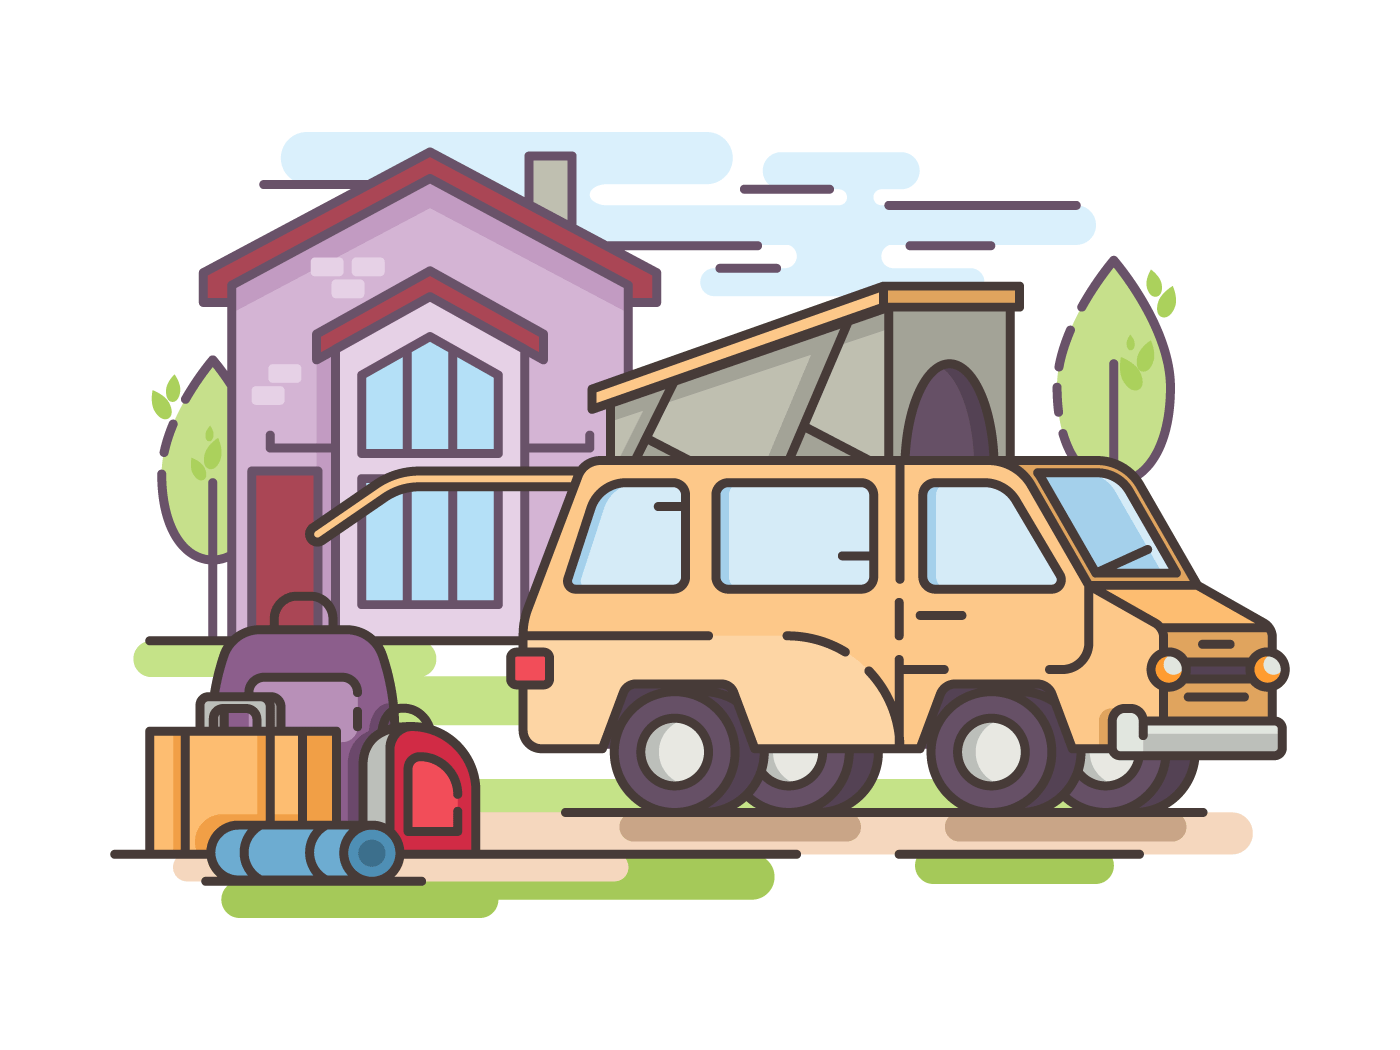 Collect things for recreation or transfer to large van. Vector illustration